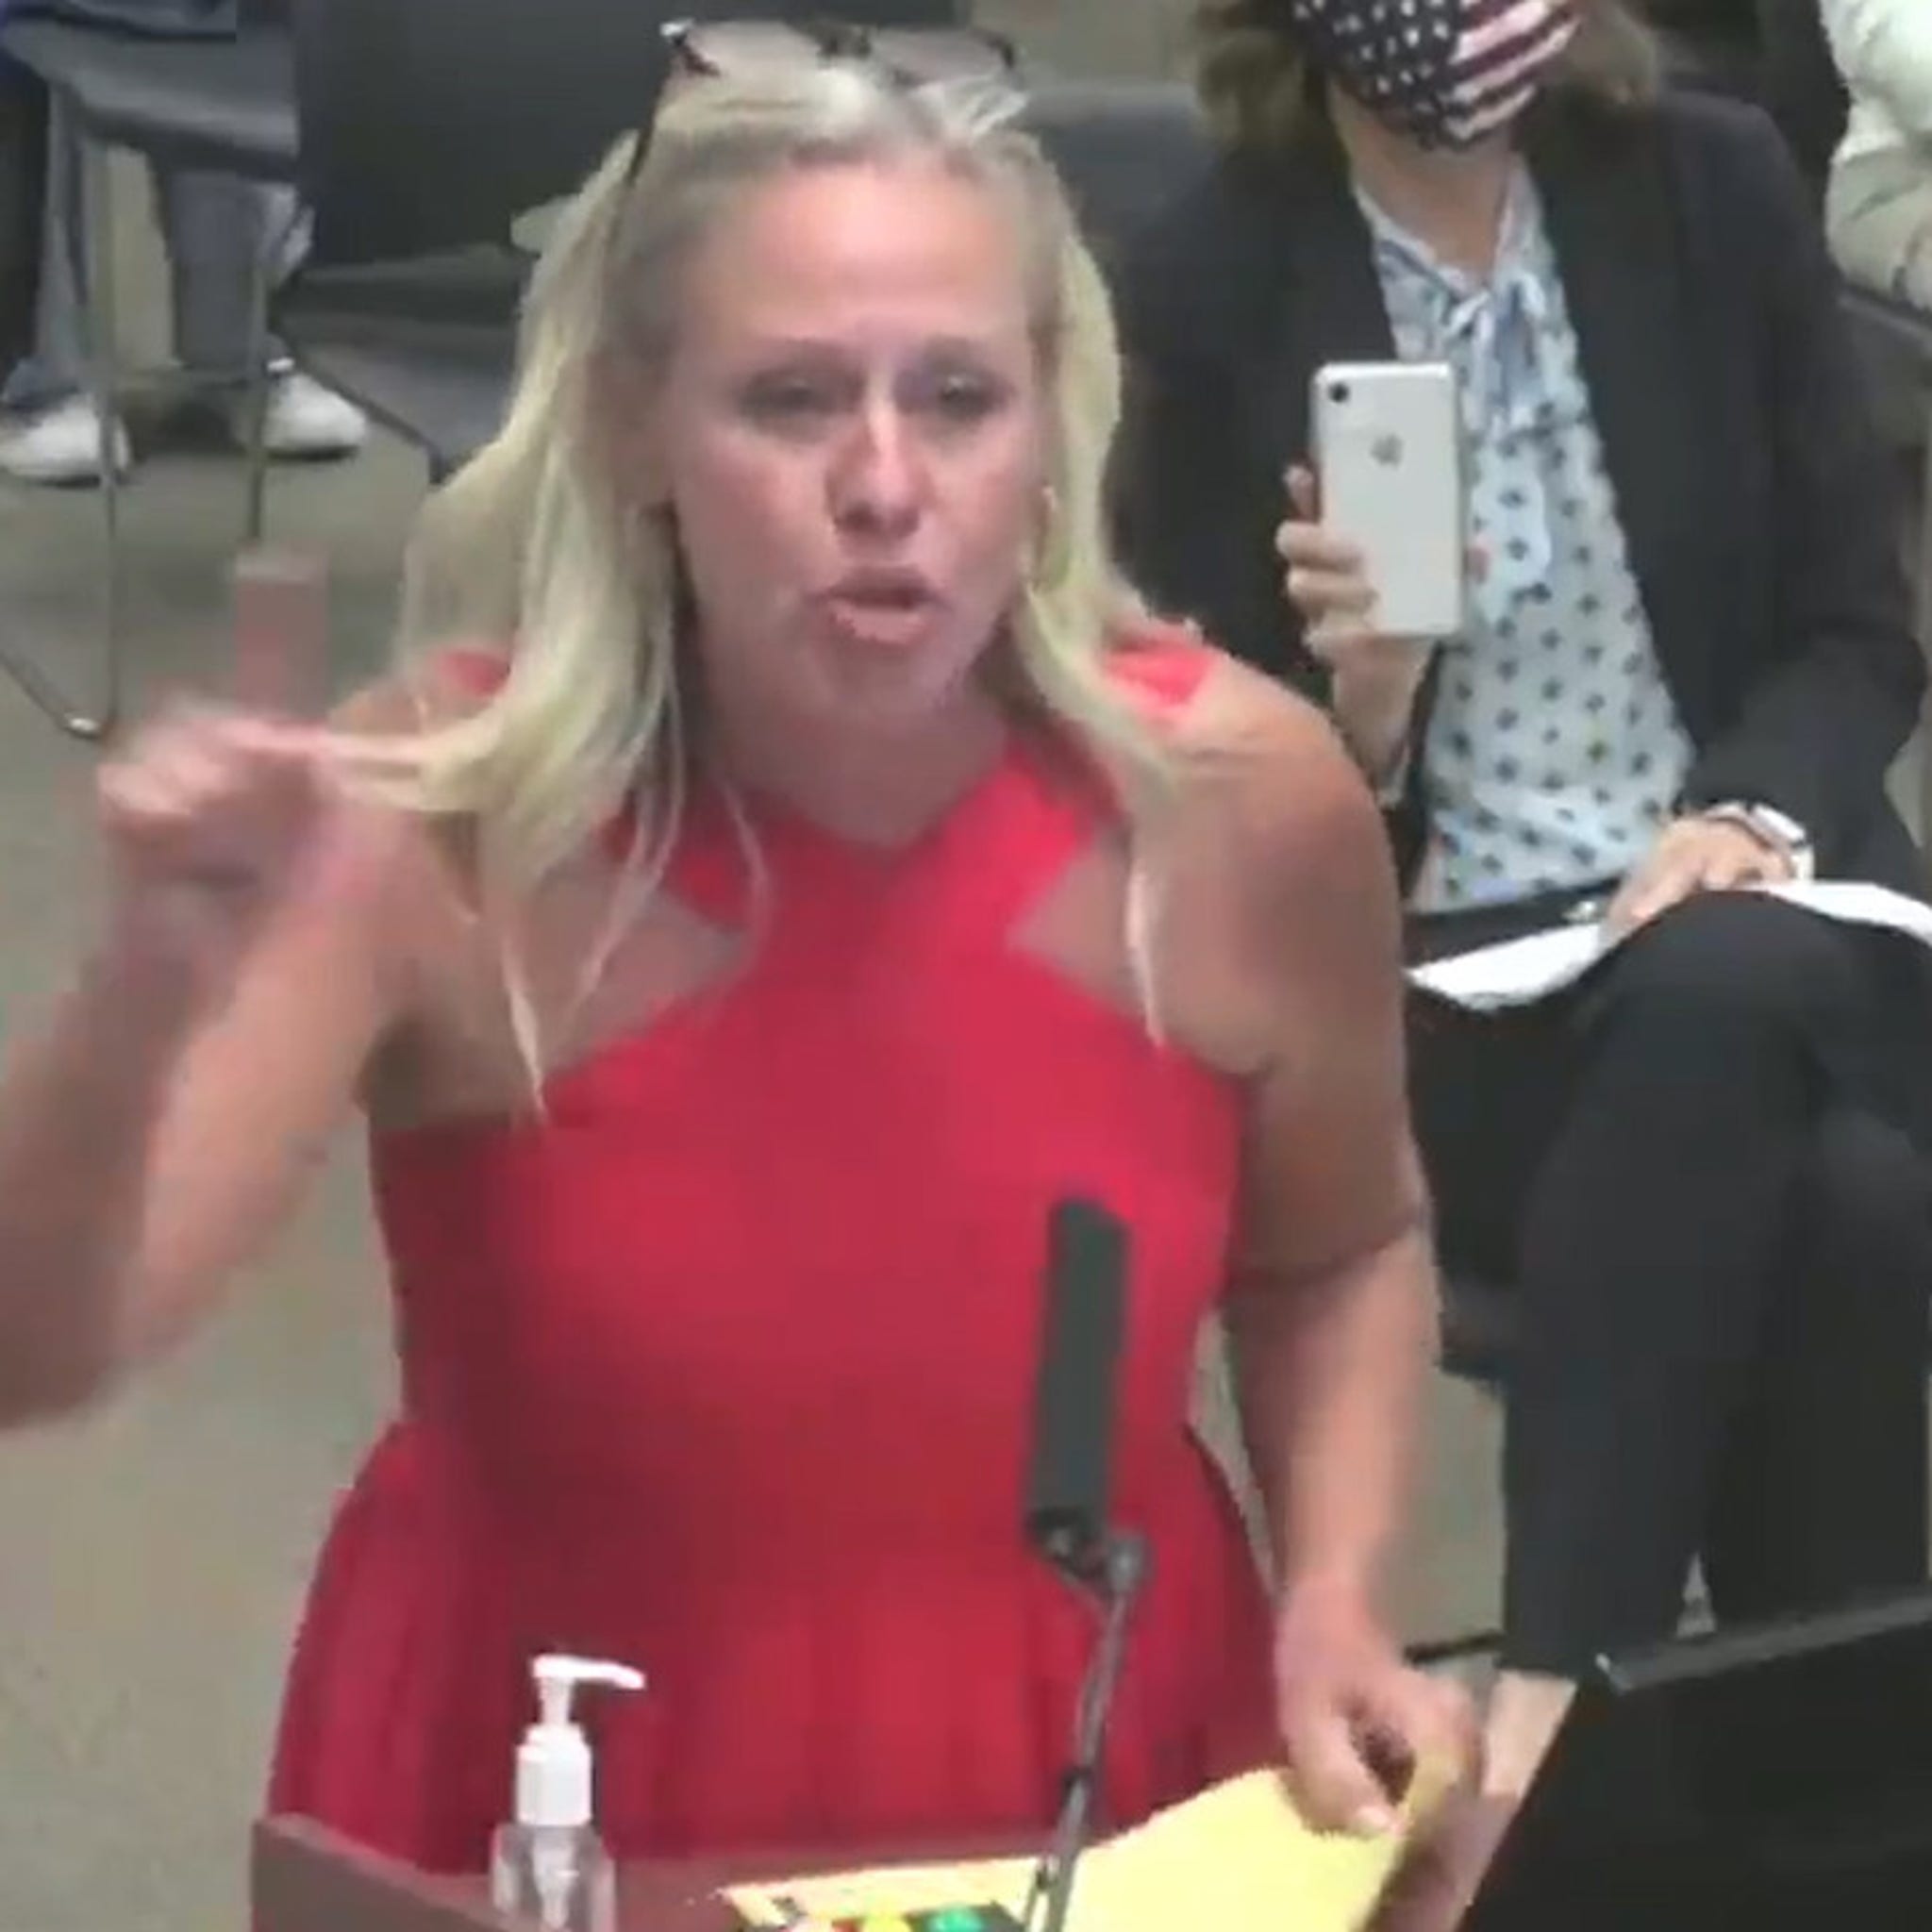 Texas Mom Loses It Over Anal Sex in Book at School Board Meeting pic